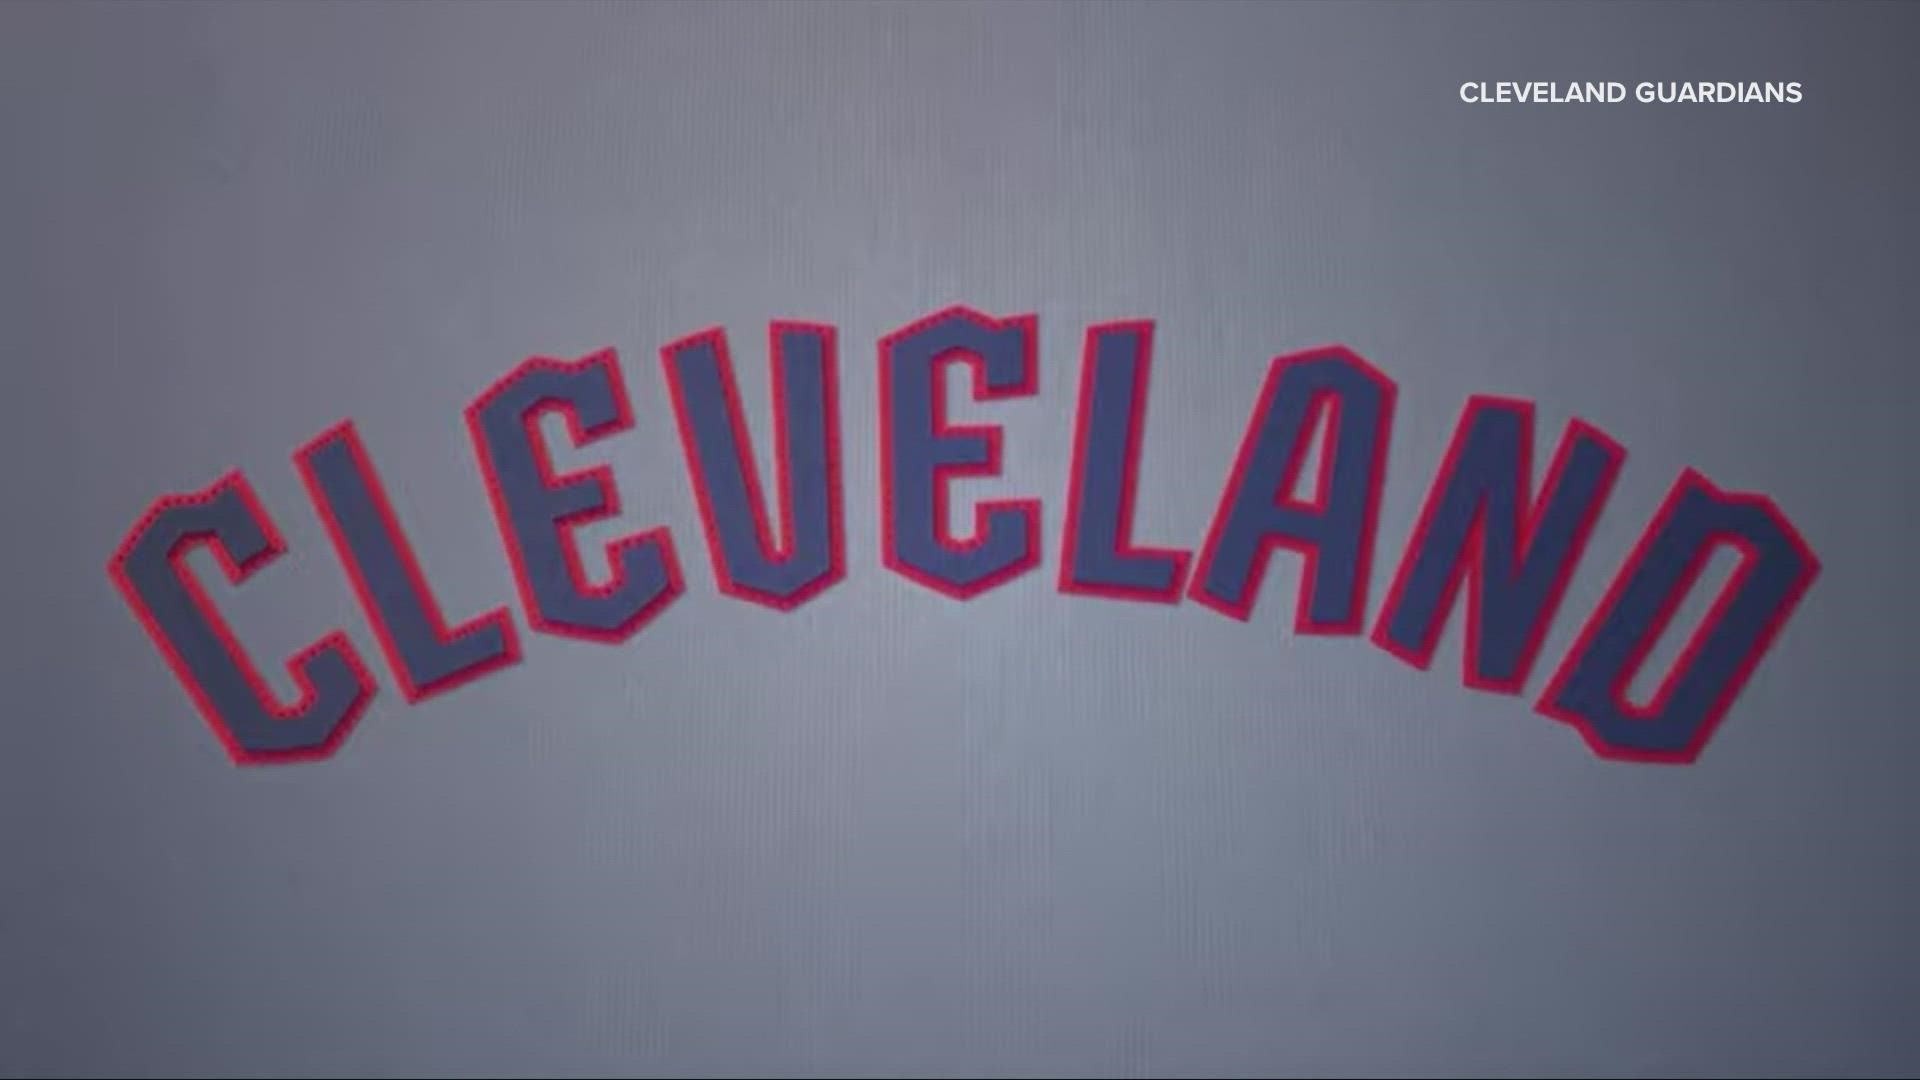 Less than four months after unleashing their 'We Are Cleveland' team song, there’s a new tune from the Guards that was just released early Monday morning.